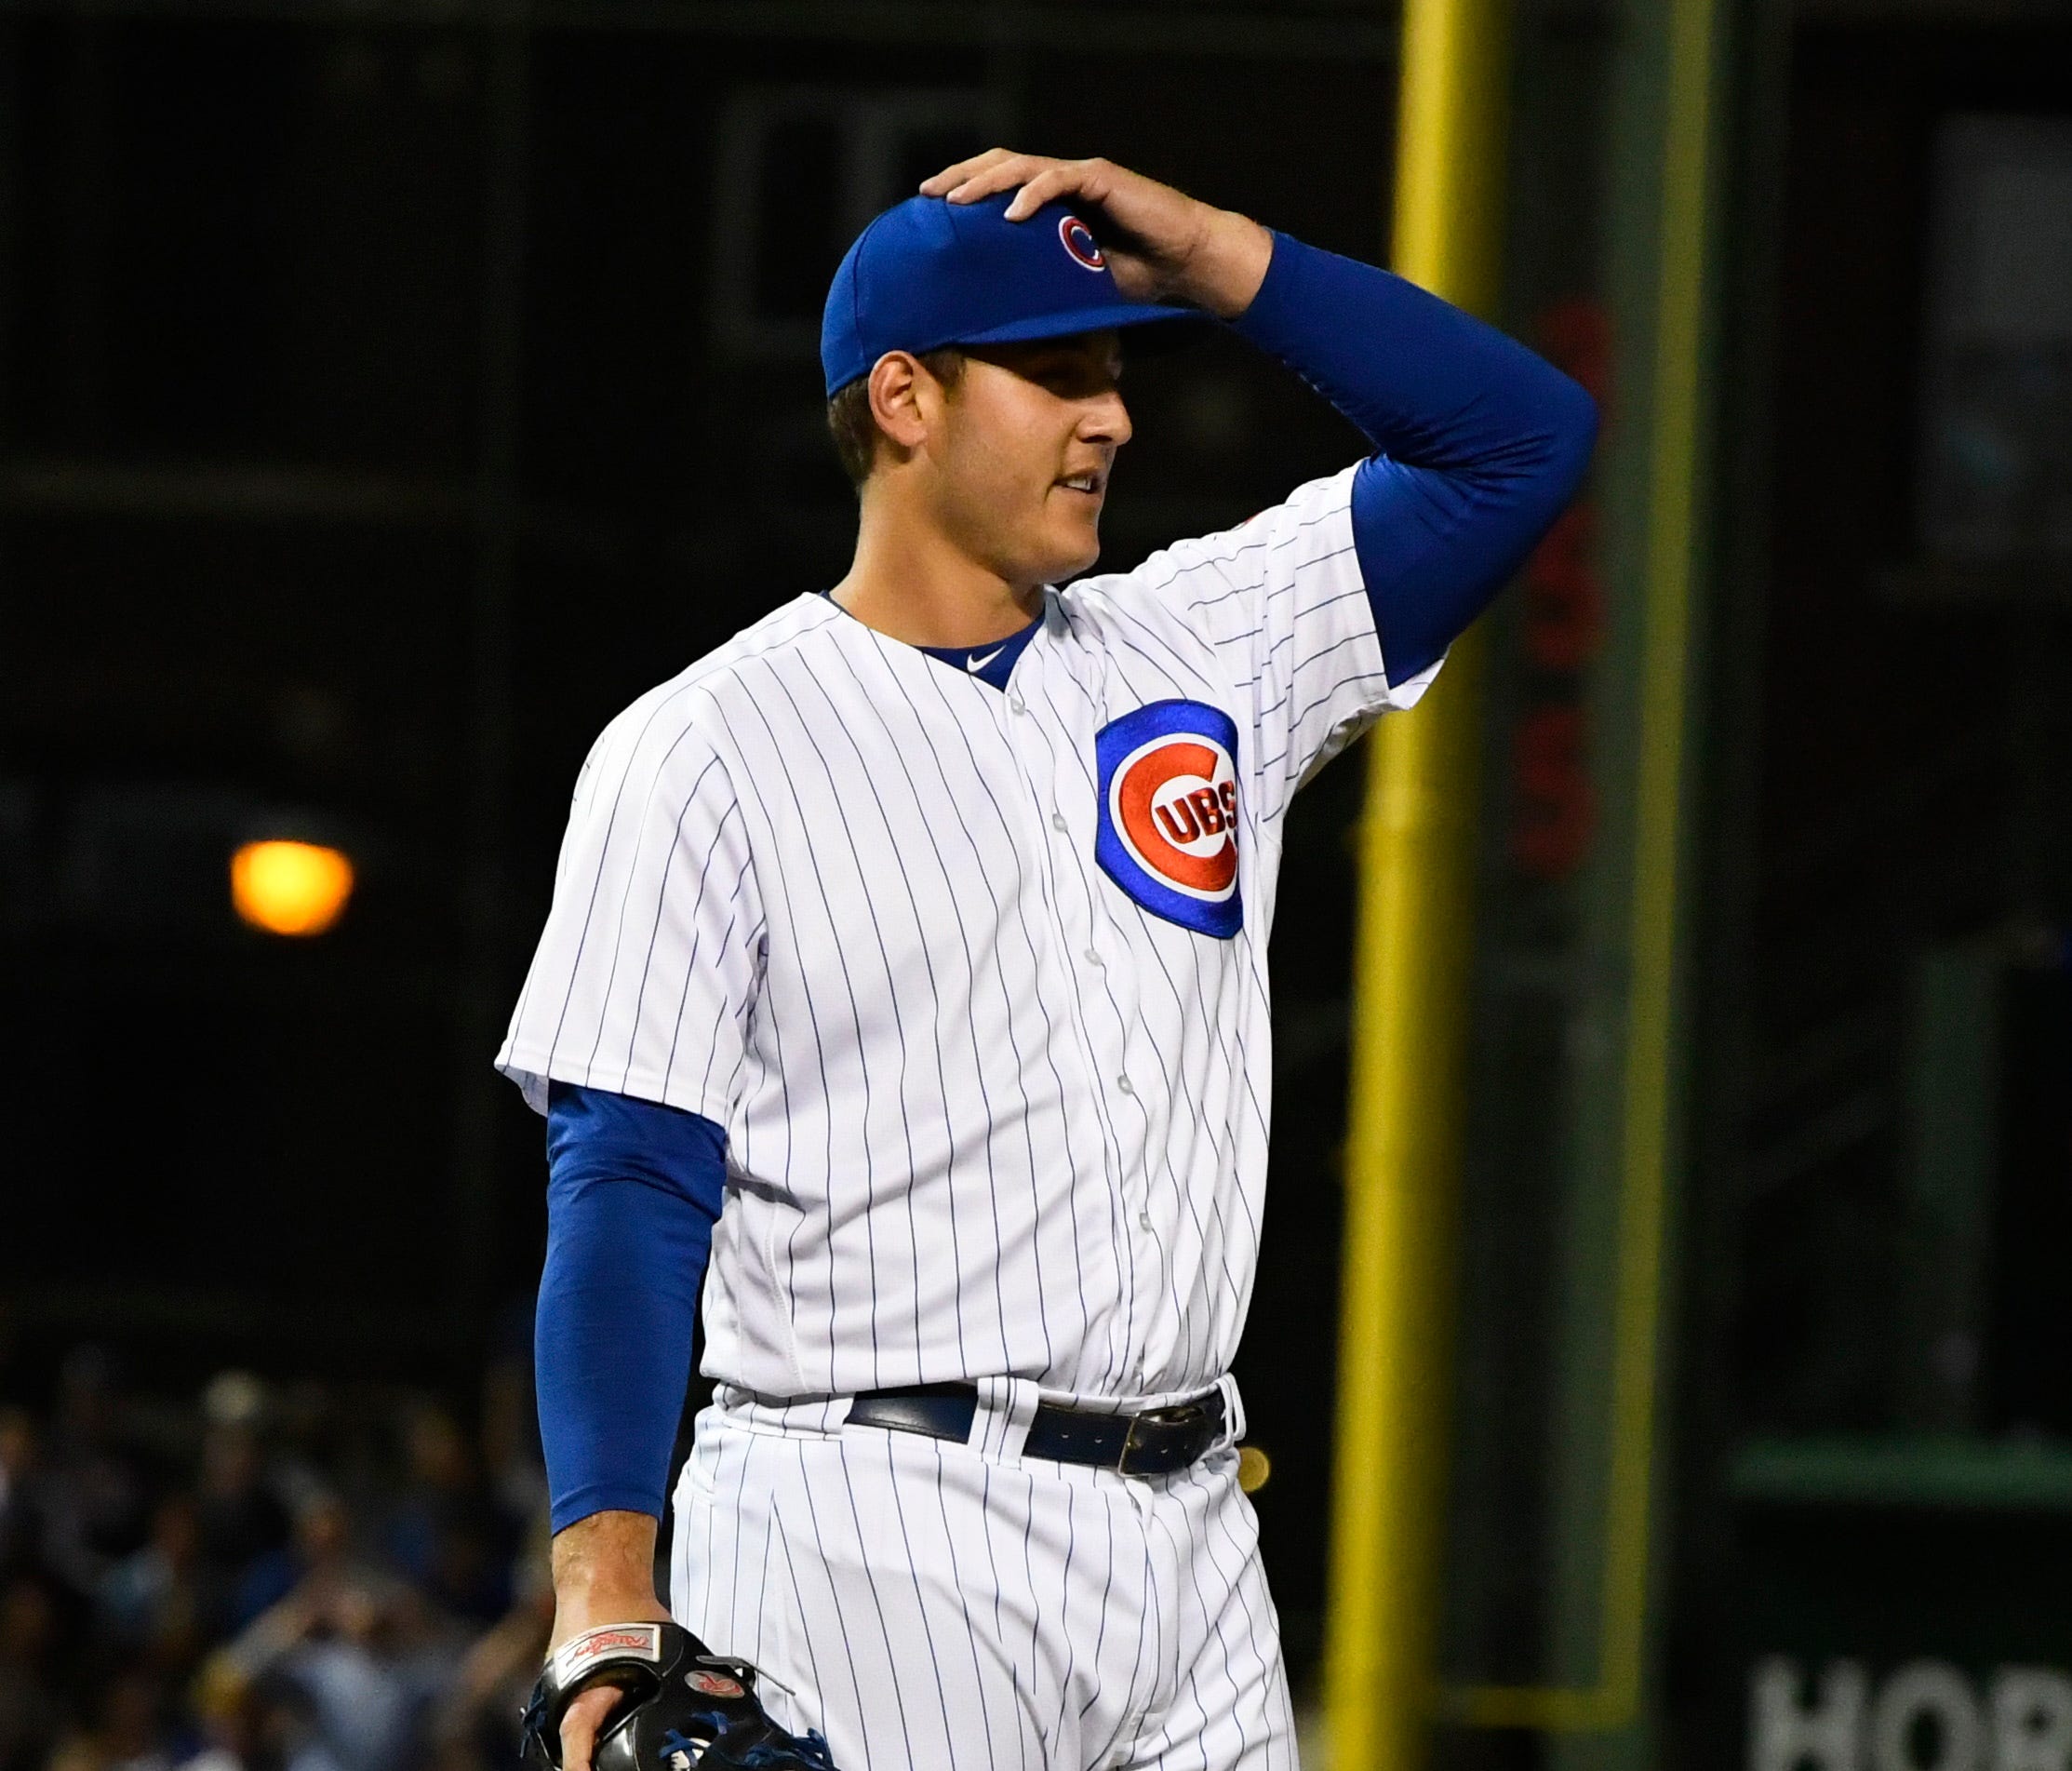 Chicago Cubs first baseman Anthony Rizzo (44) holds his hat while he stands on the mound to pitch against the Arizona Diamondbacks in the ninth inning at Wrigley Field.